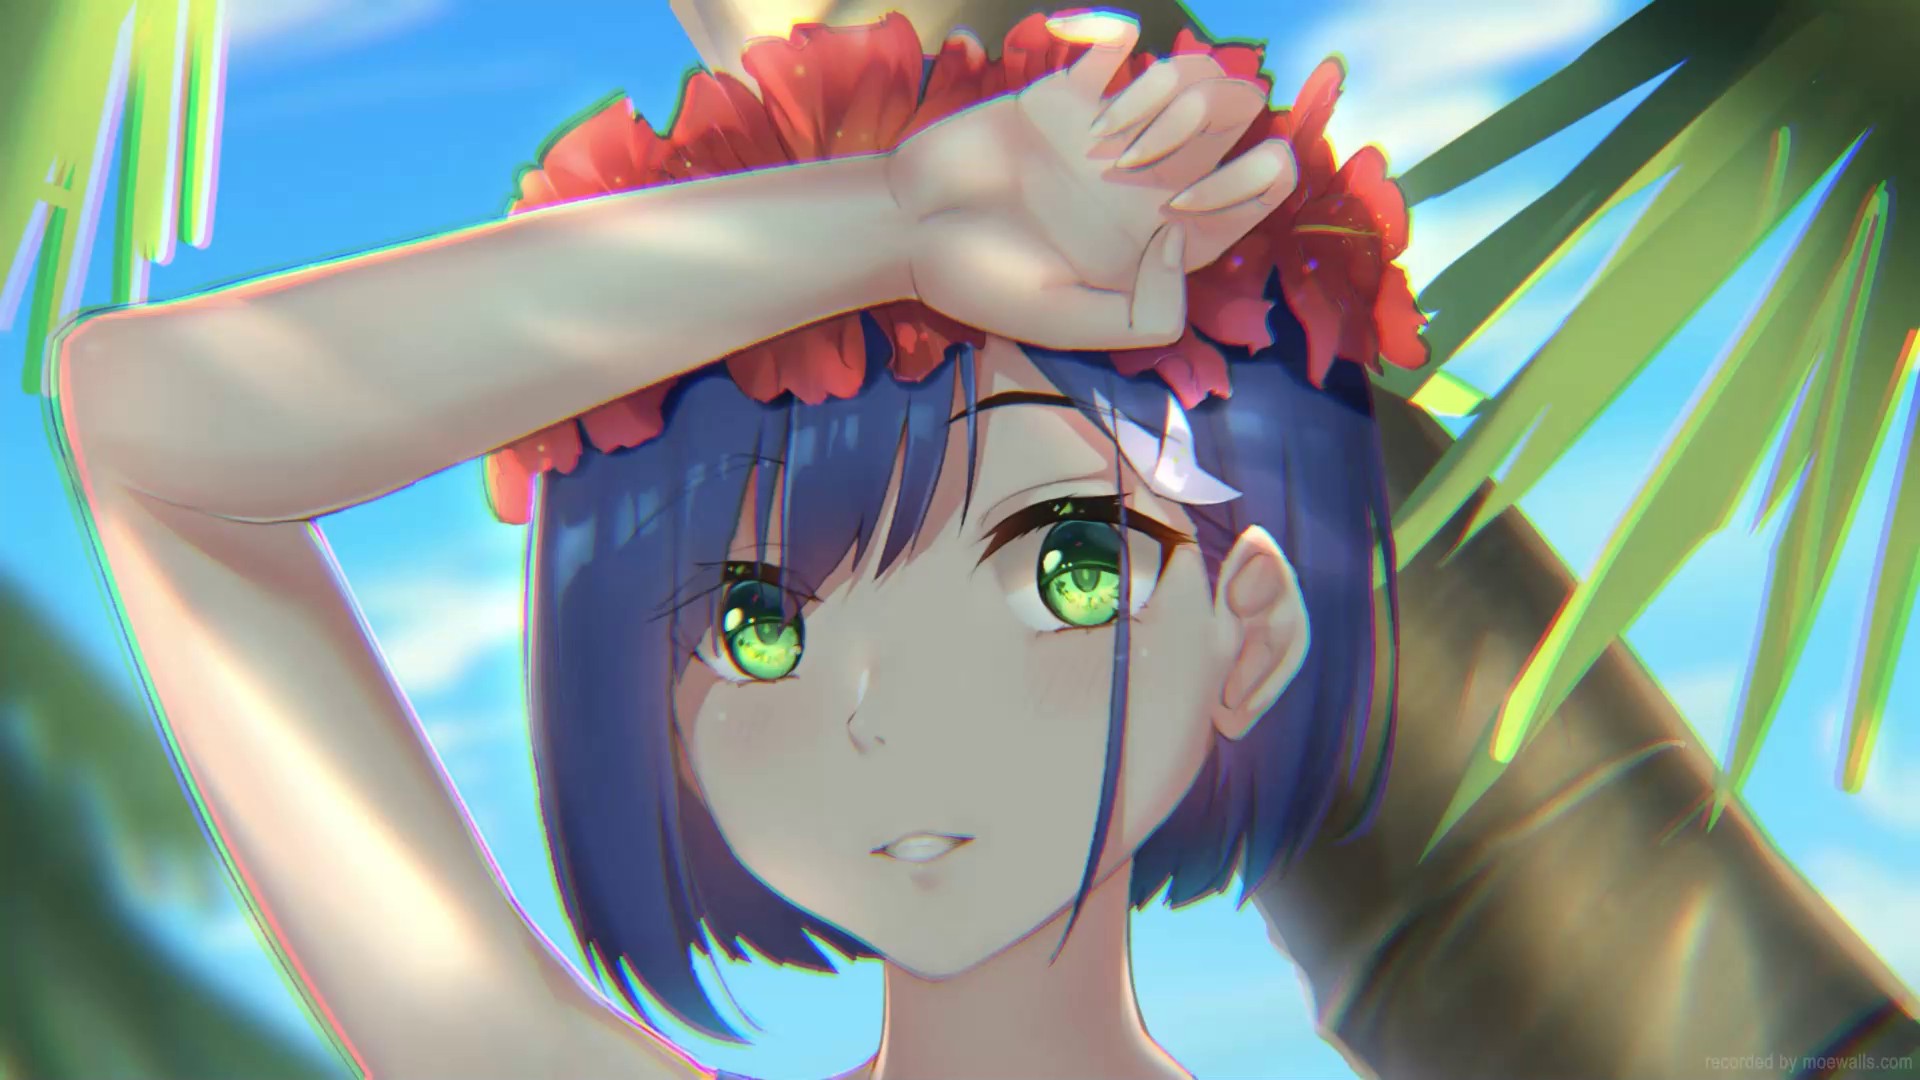 46 Summer Live Wallpapers, Animated Wallpapers - MoeWalls